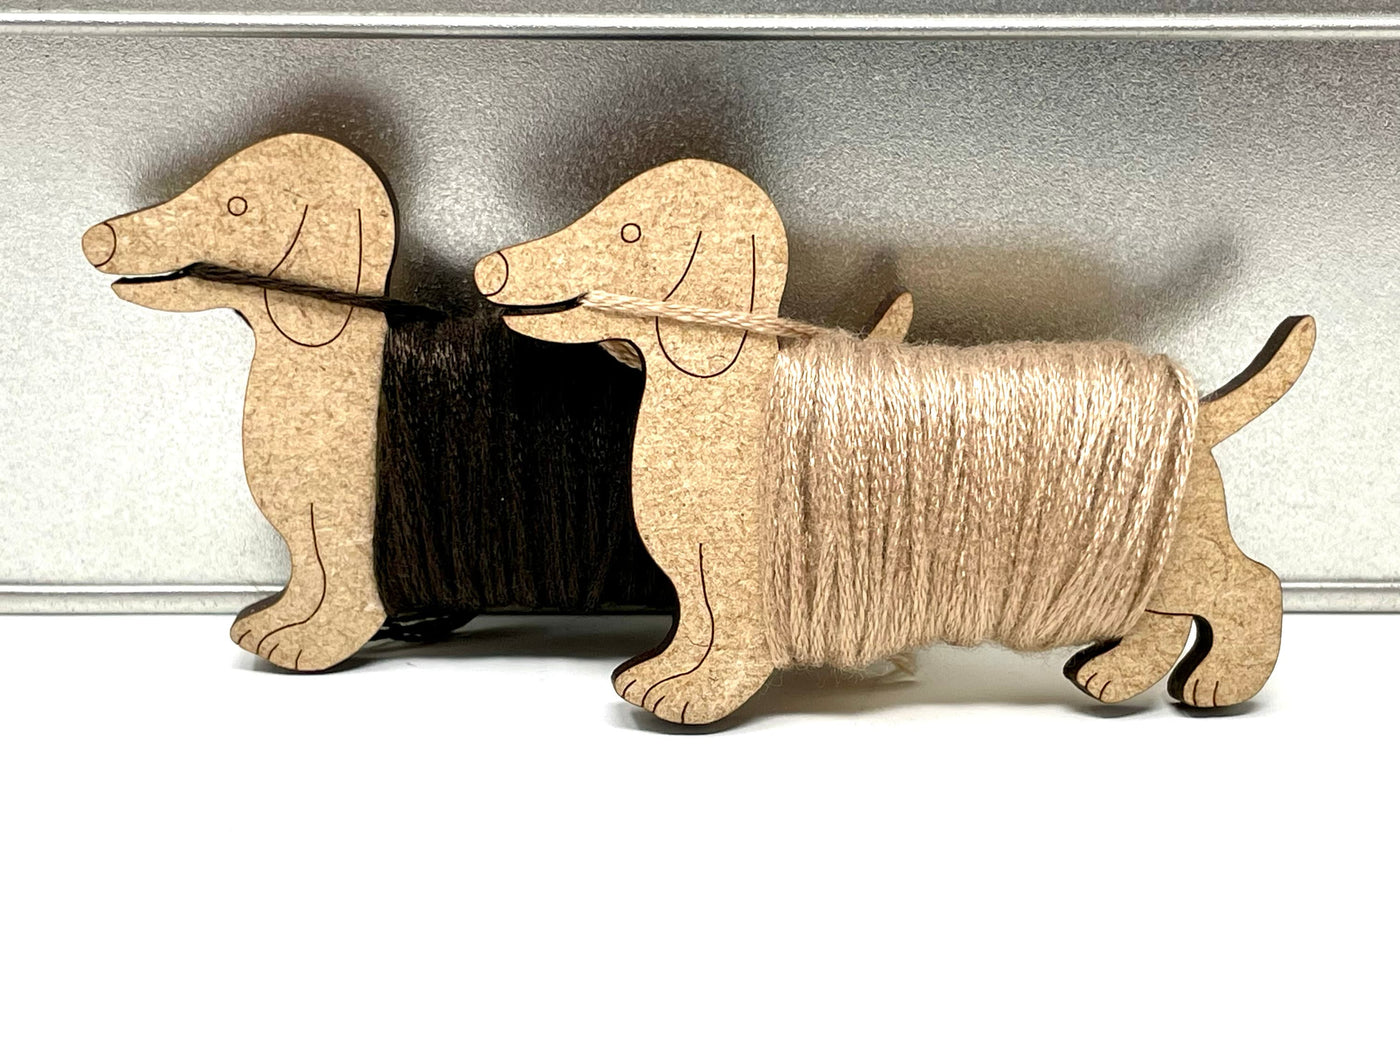 Dachshund tin with 20x wooden bobbins for cross stitch and embroidery projects